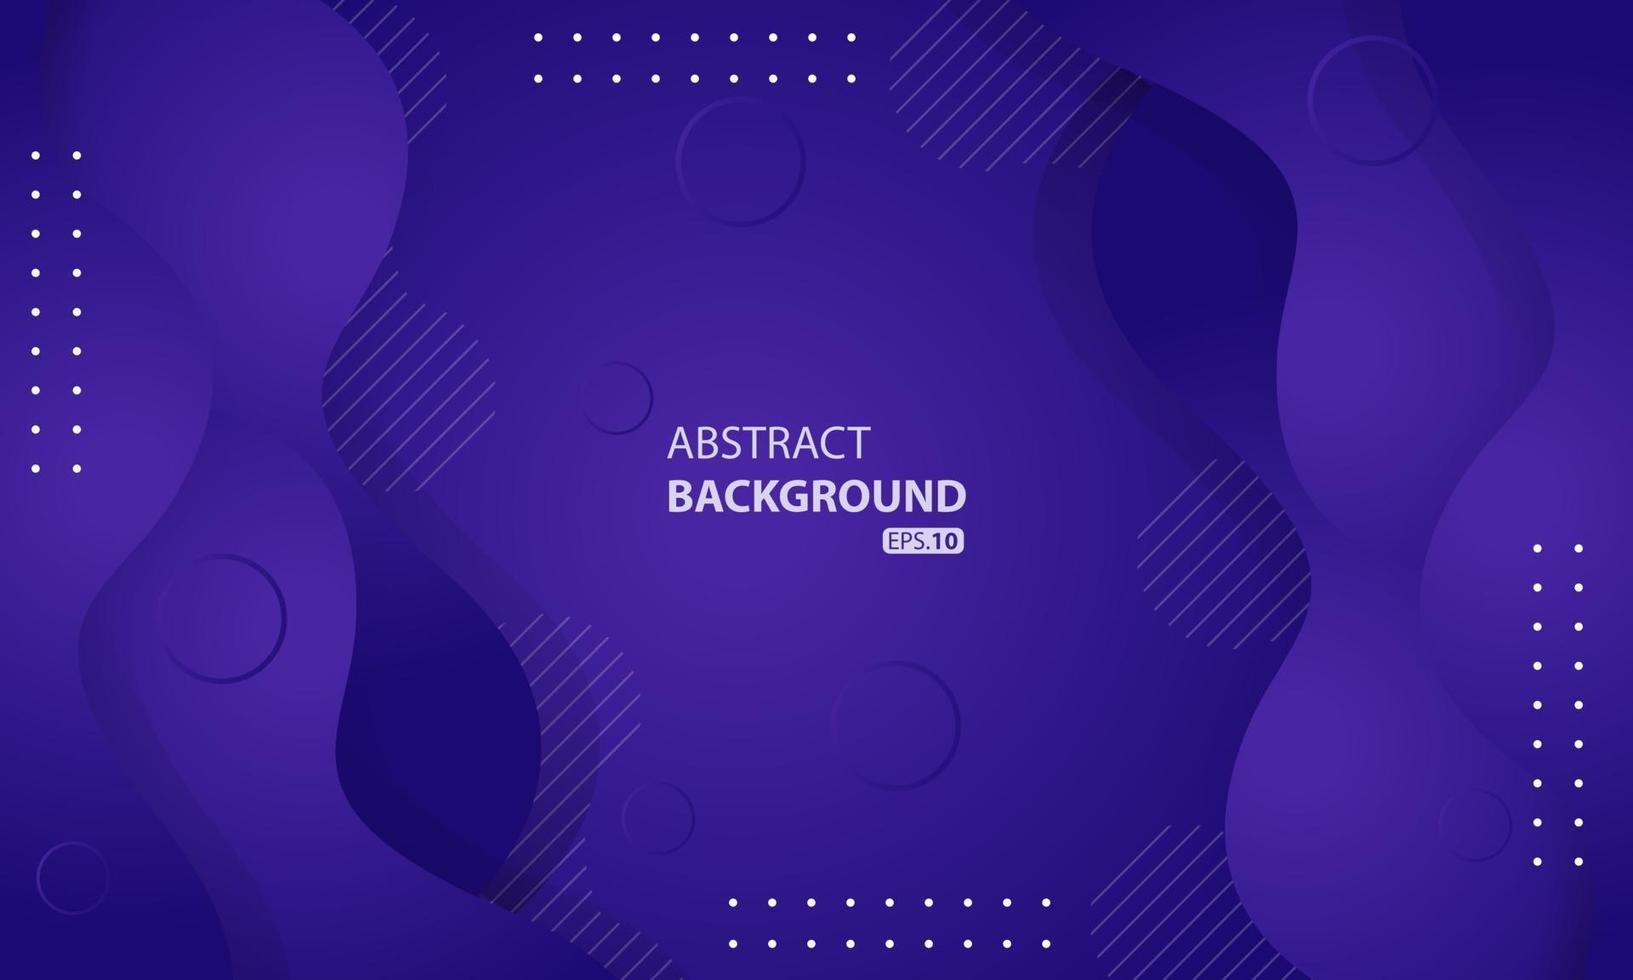 Abstract liquid background with purple gradient color. Dynamic textured background design. eps 10 vector